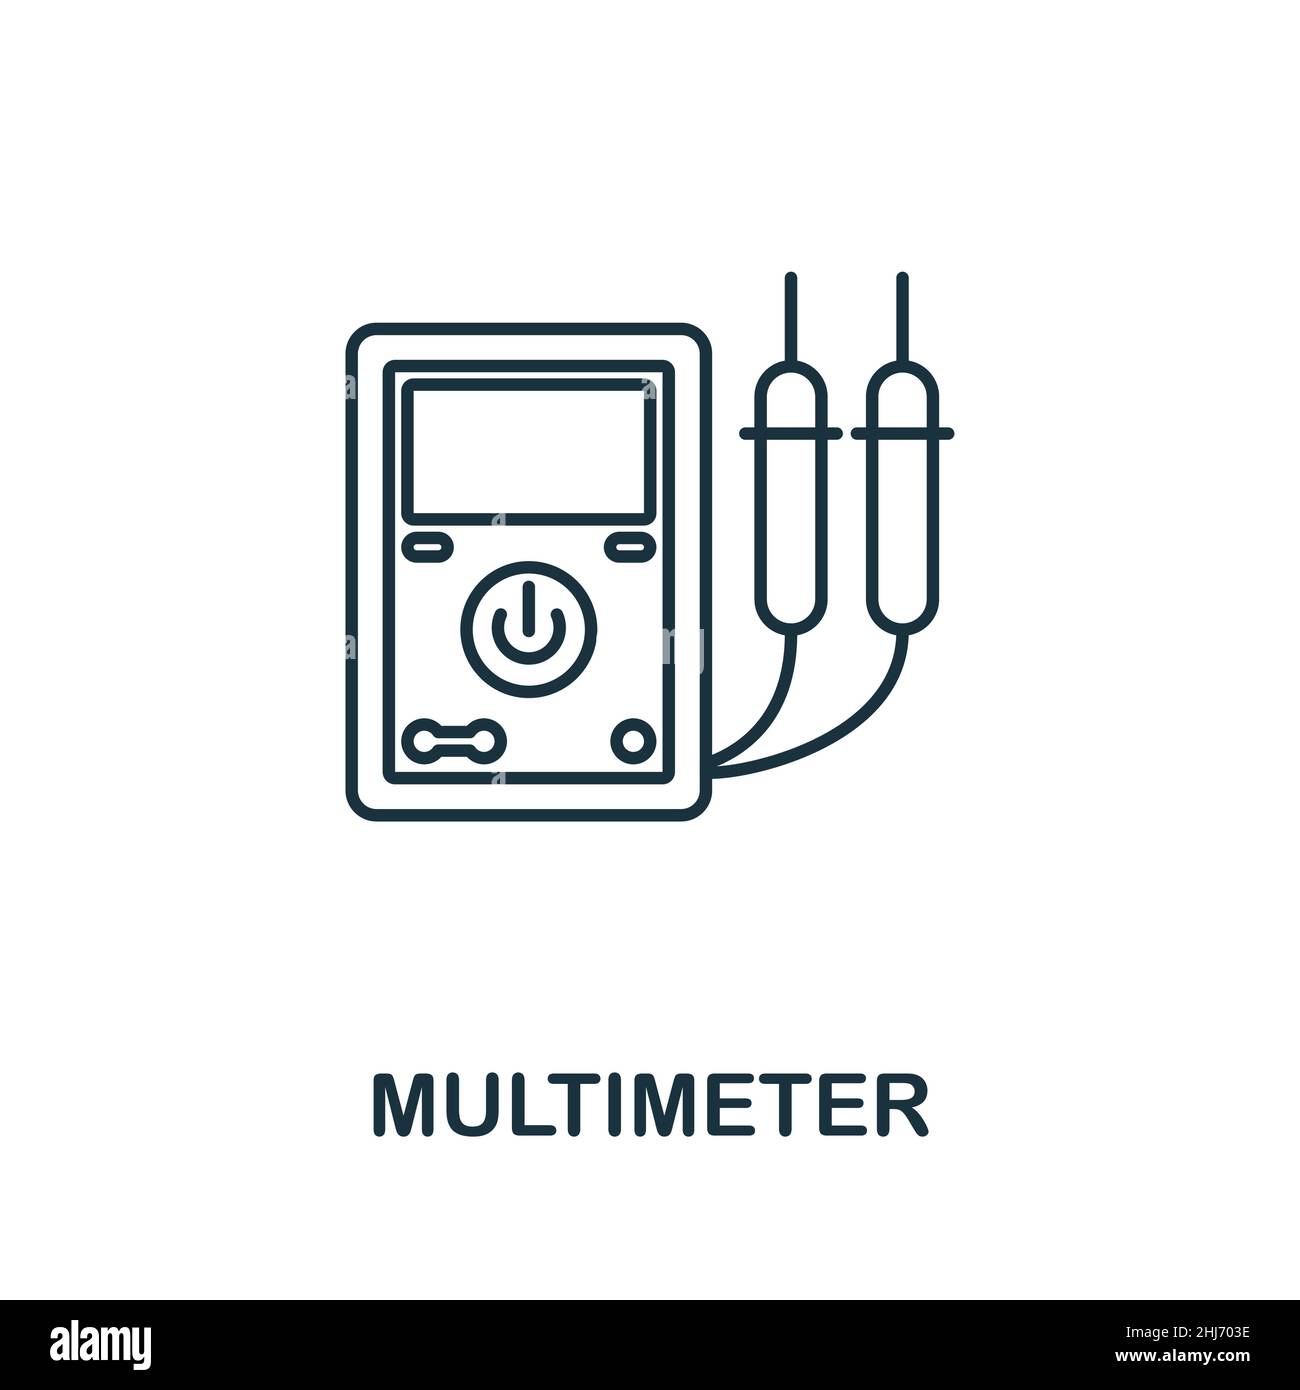 Multimeter icon. Line element from machinery collection. Linear Multimeter icon sign for web design, infographics and more. Stock Vector